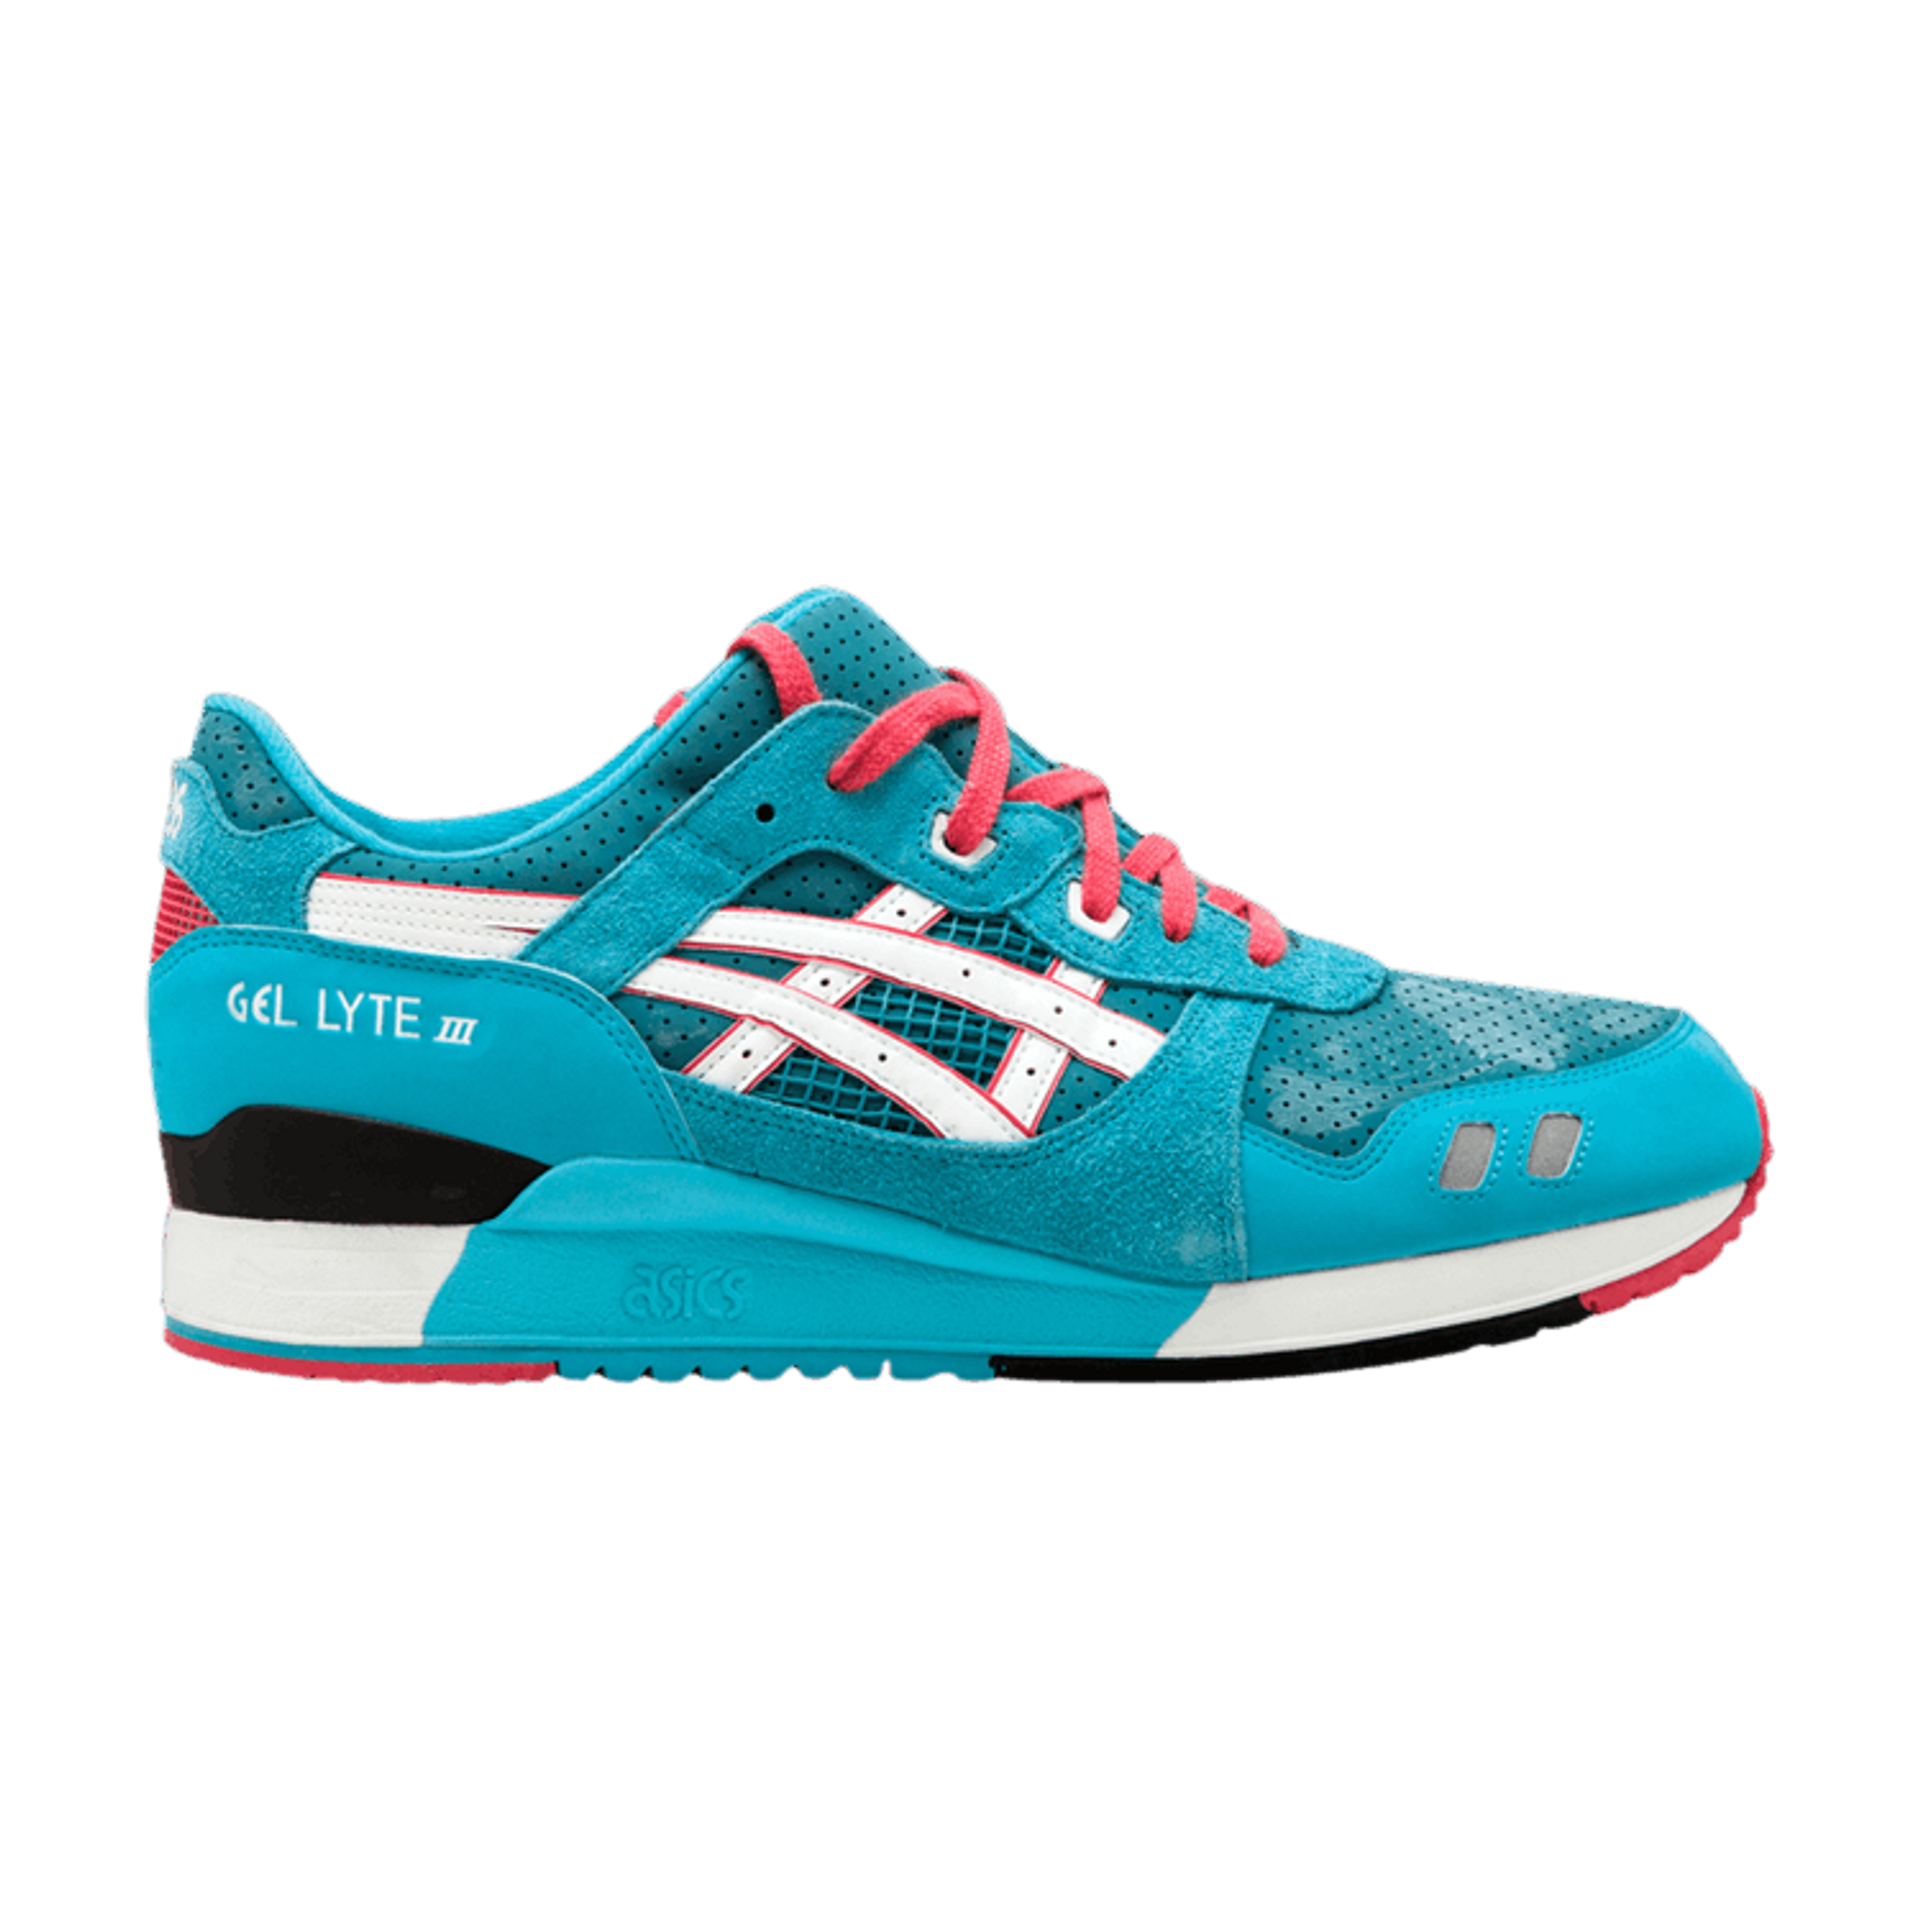 Pick Your Shoes x Gel Lyte 3 'Teal Dragon'